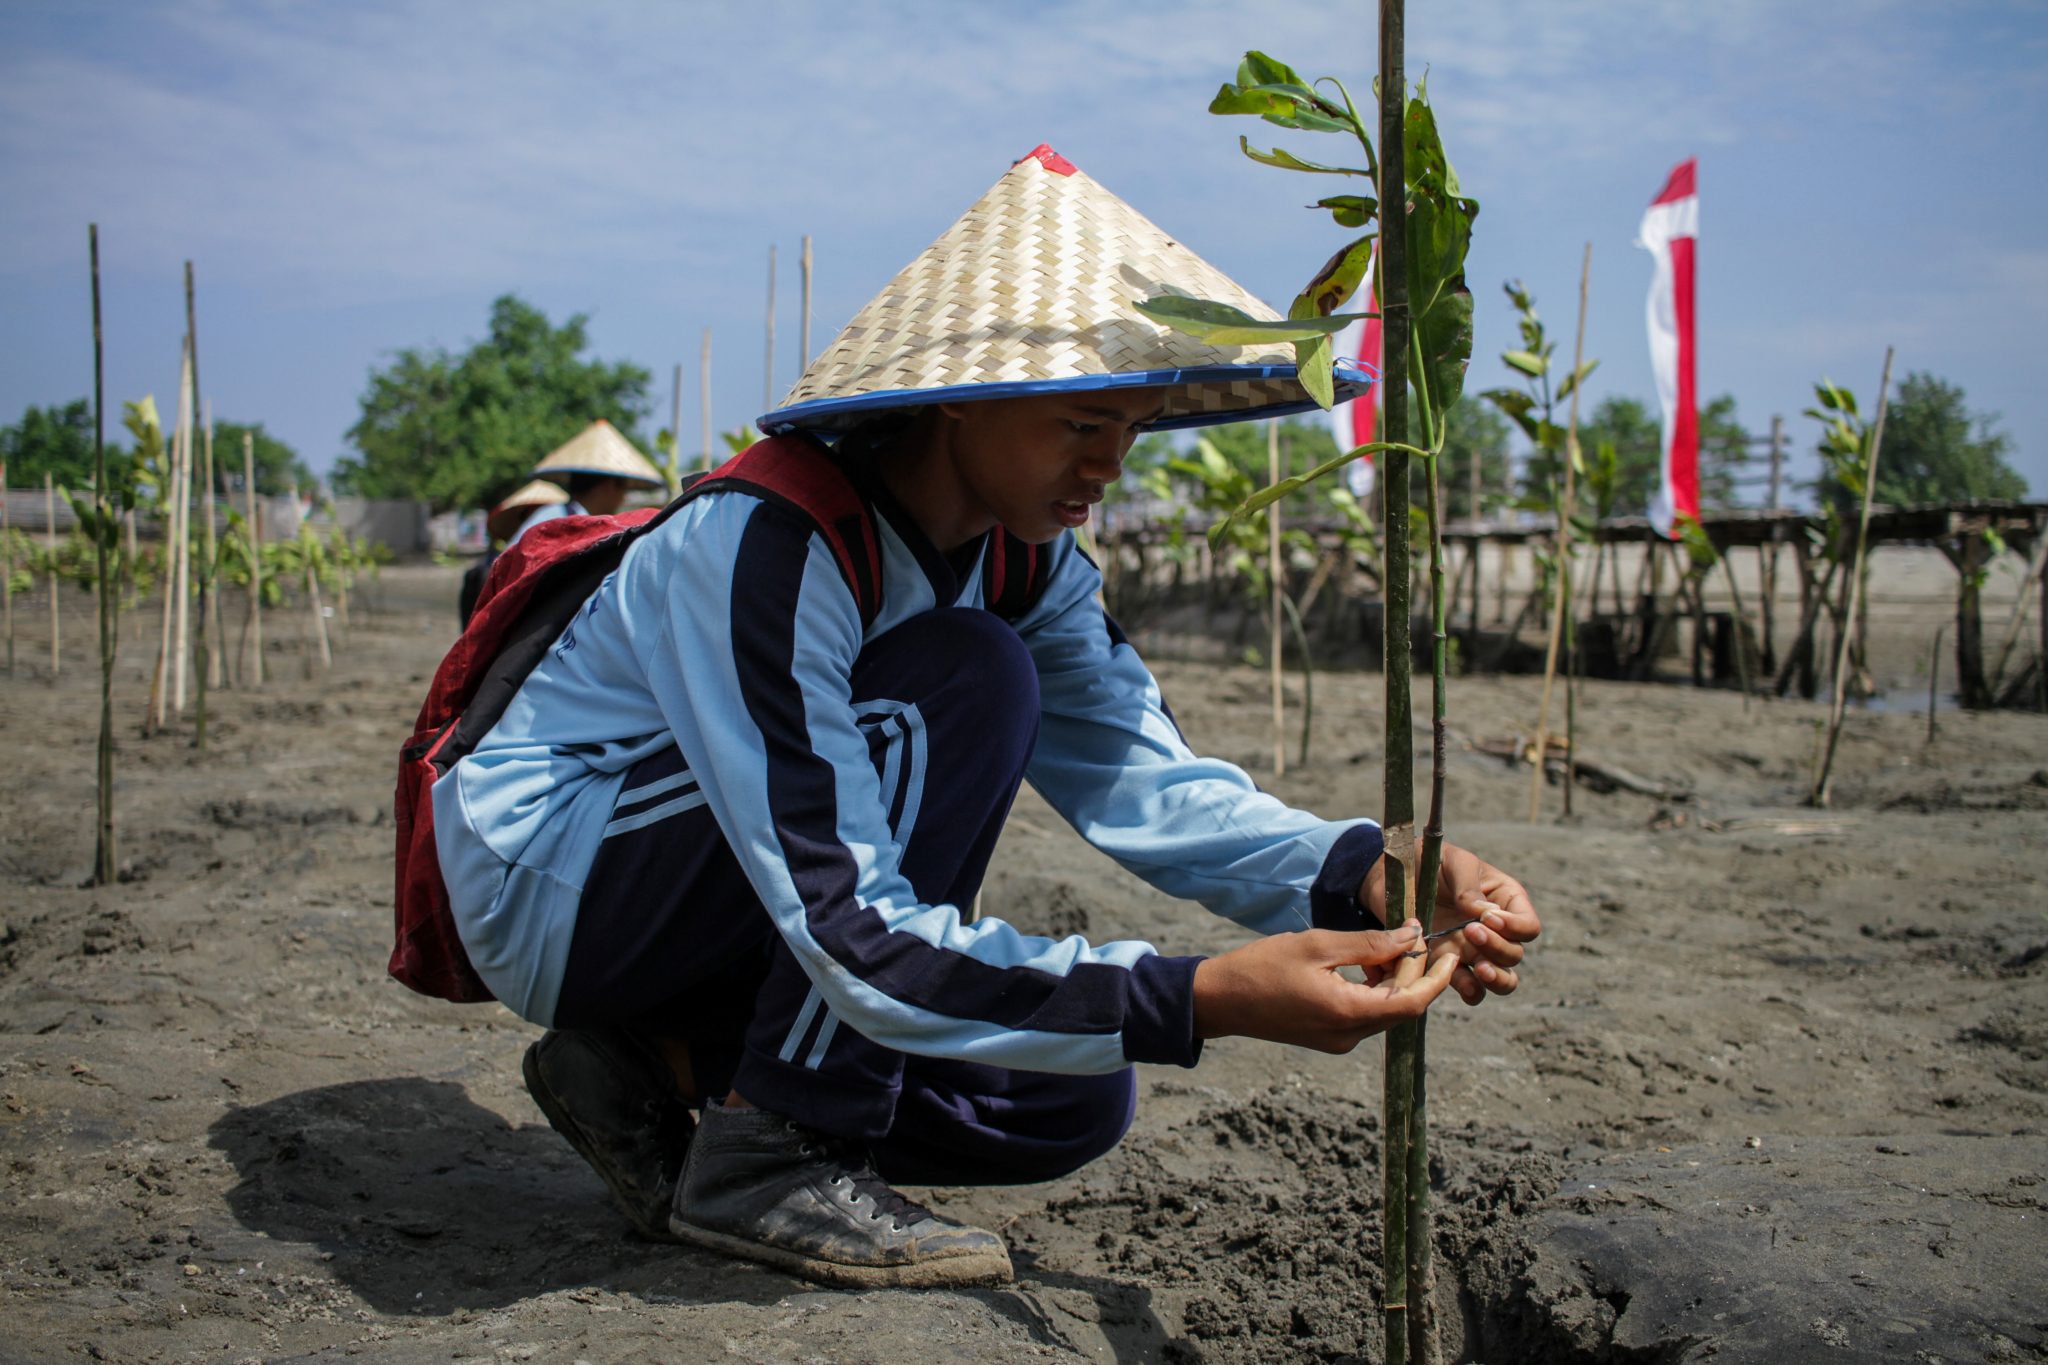 Indonesia reaching for green shoots